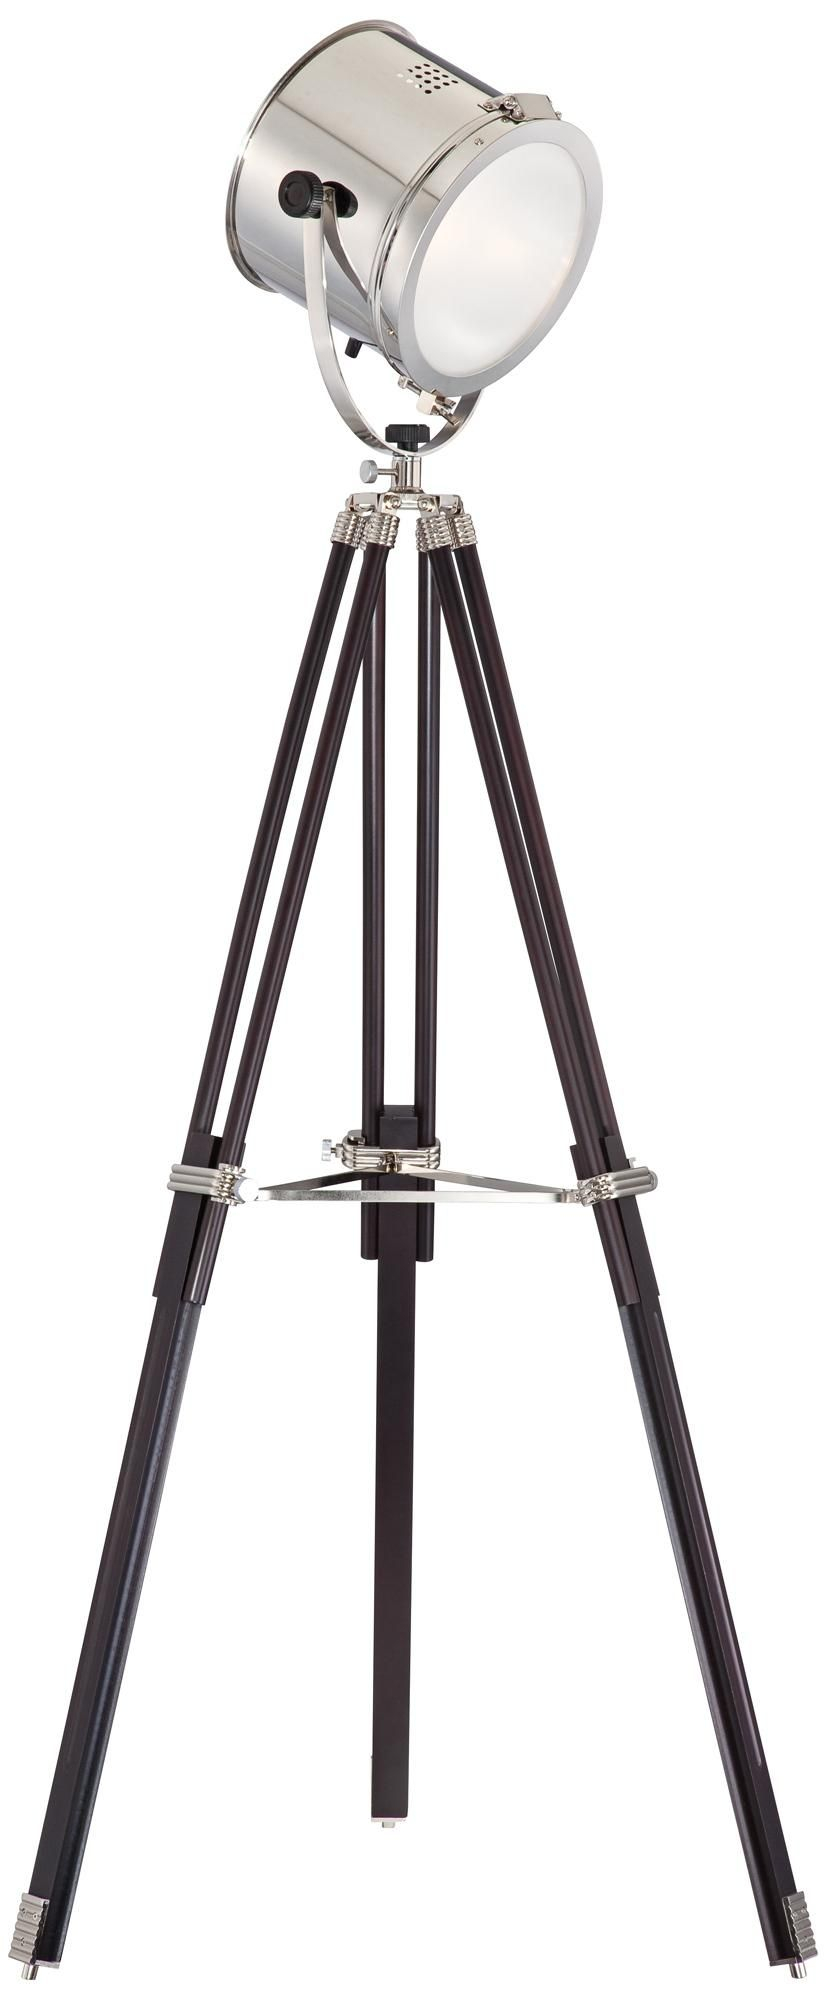 Directors Chrome And Espresso Tripod Floor Lamp Would Be with sizing 826 X 2000